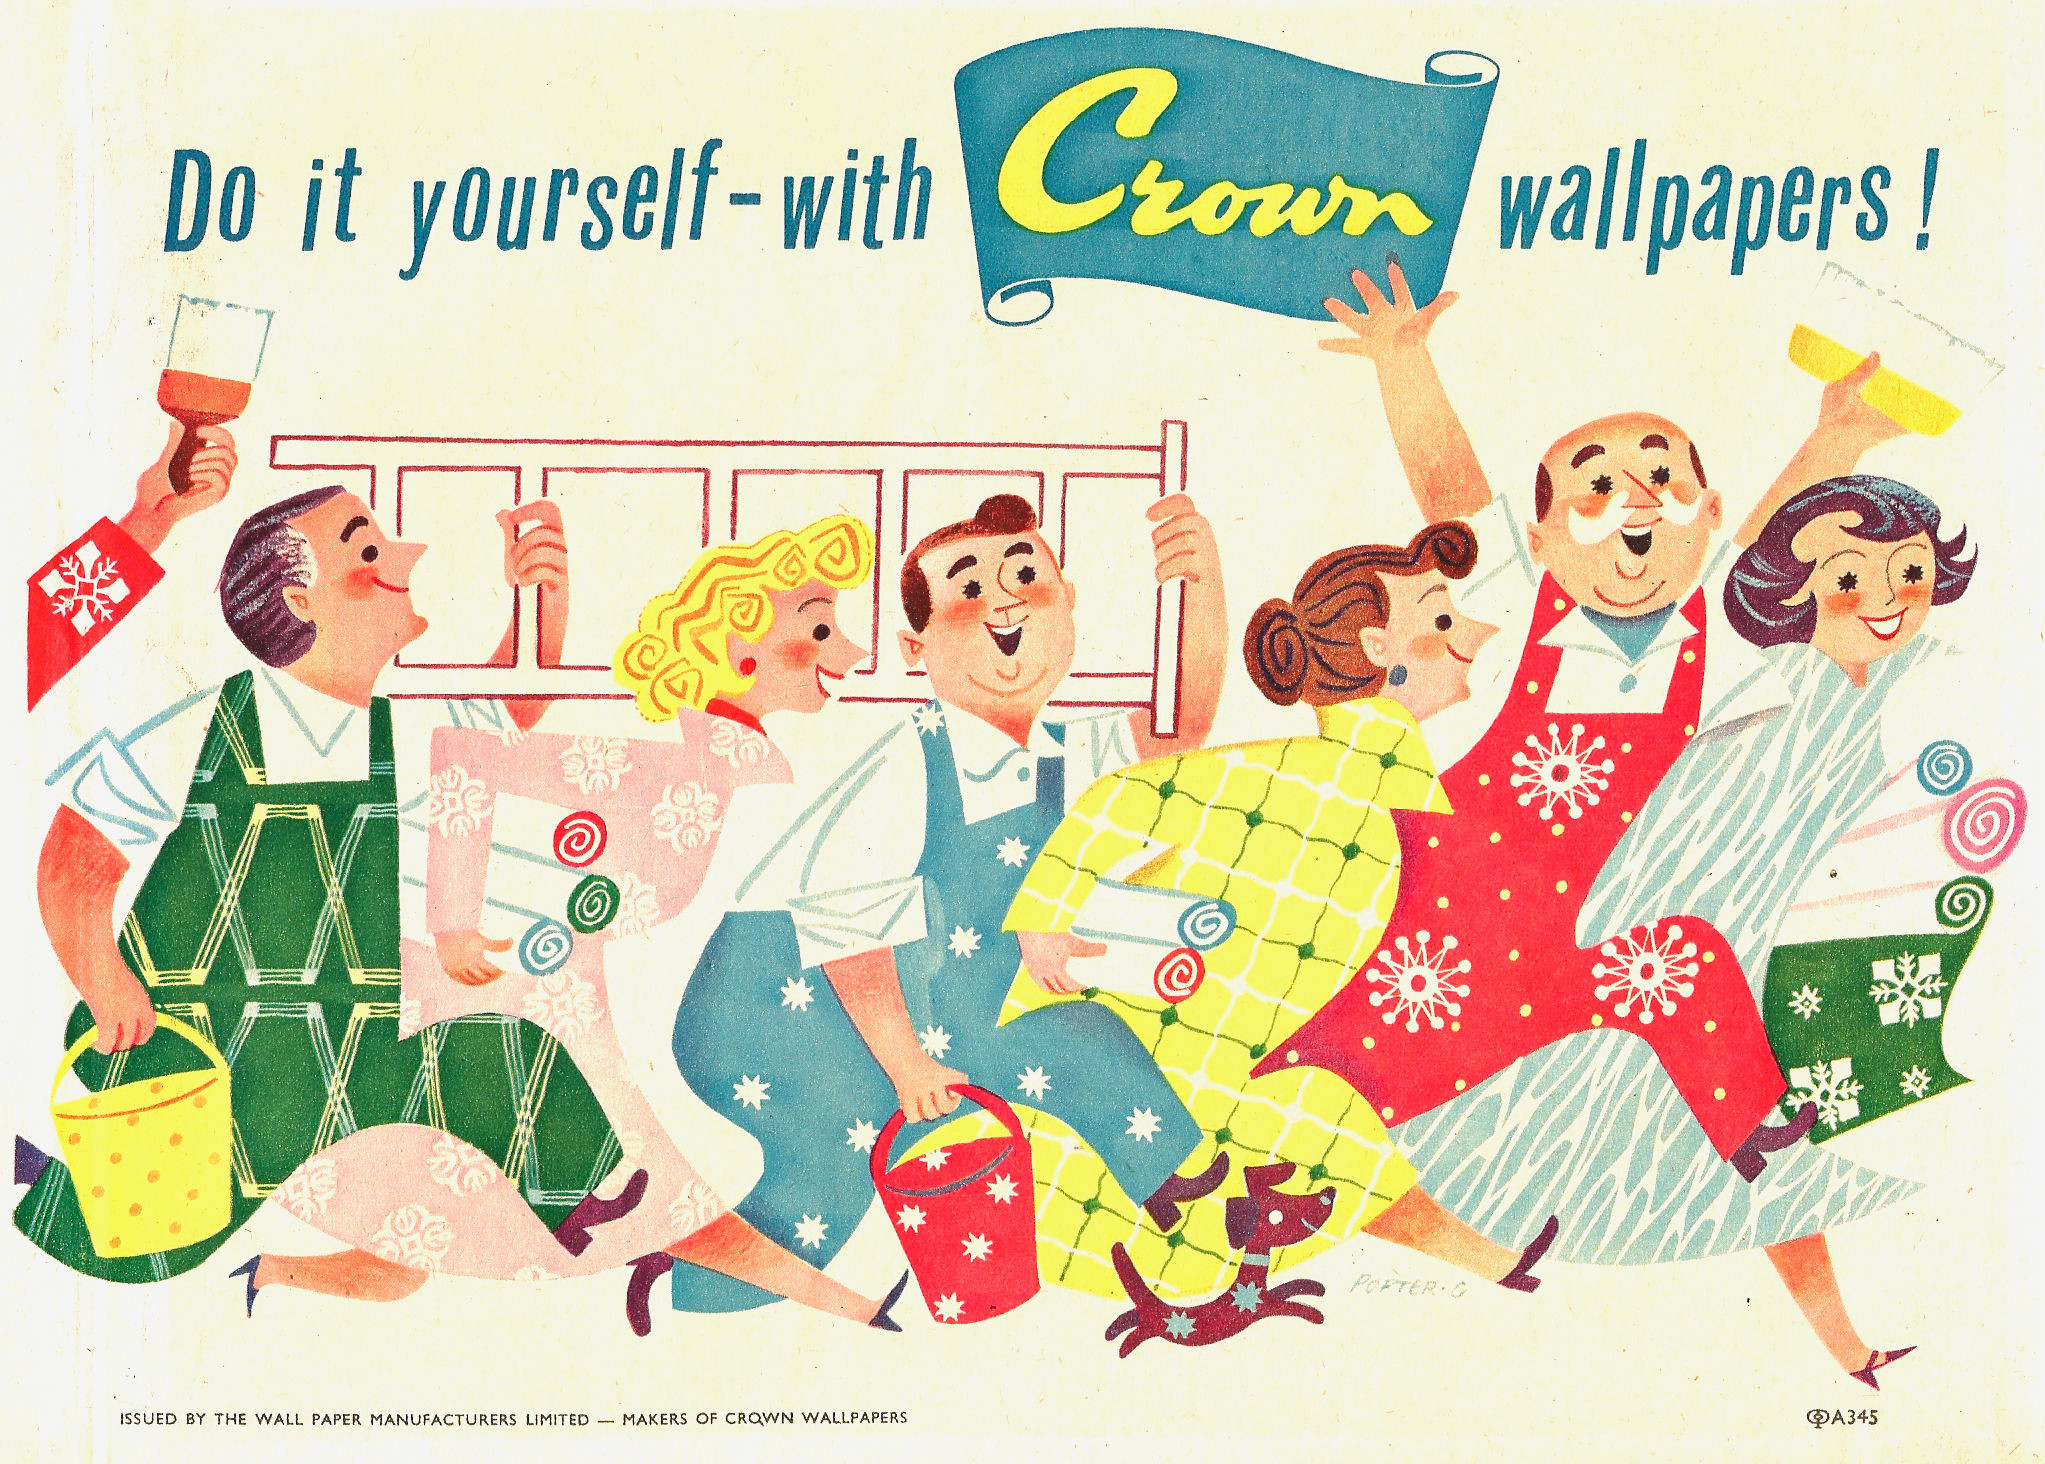 Crown Wallpapers Midcentury Ad Showing A Bunch Of Happy - Vintage Poster People Illustration - HD Wallpaper 